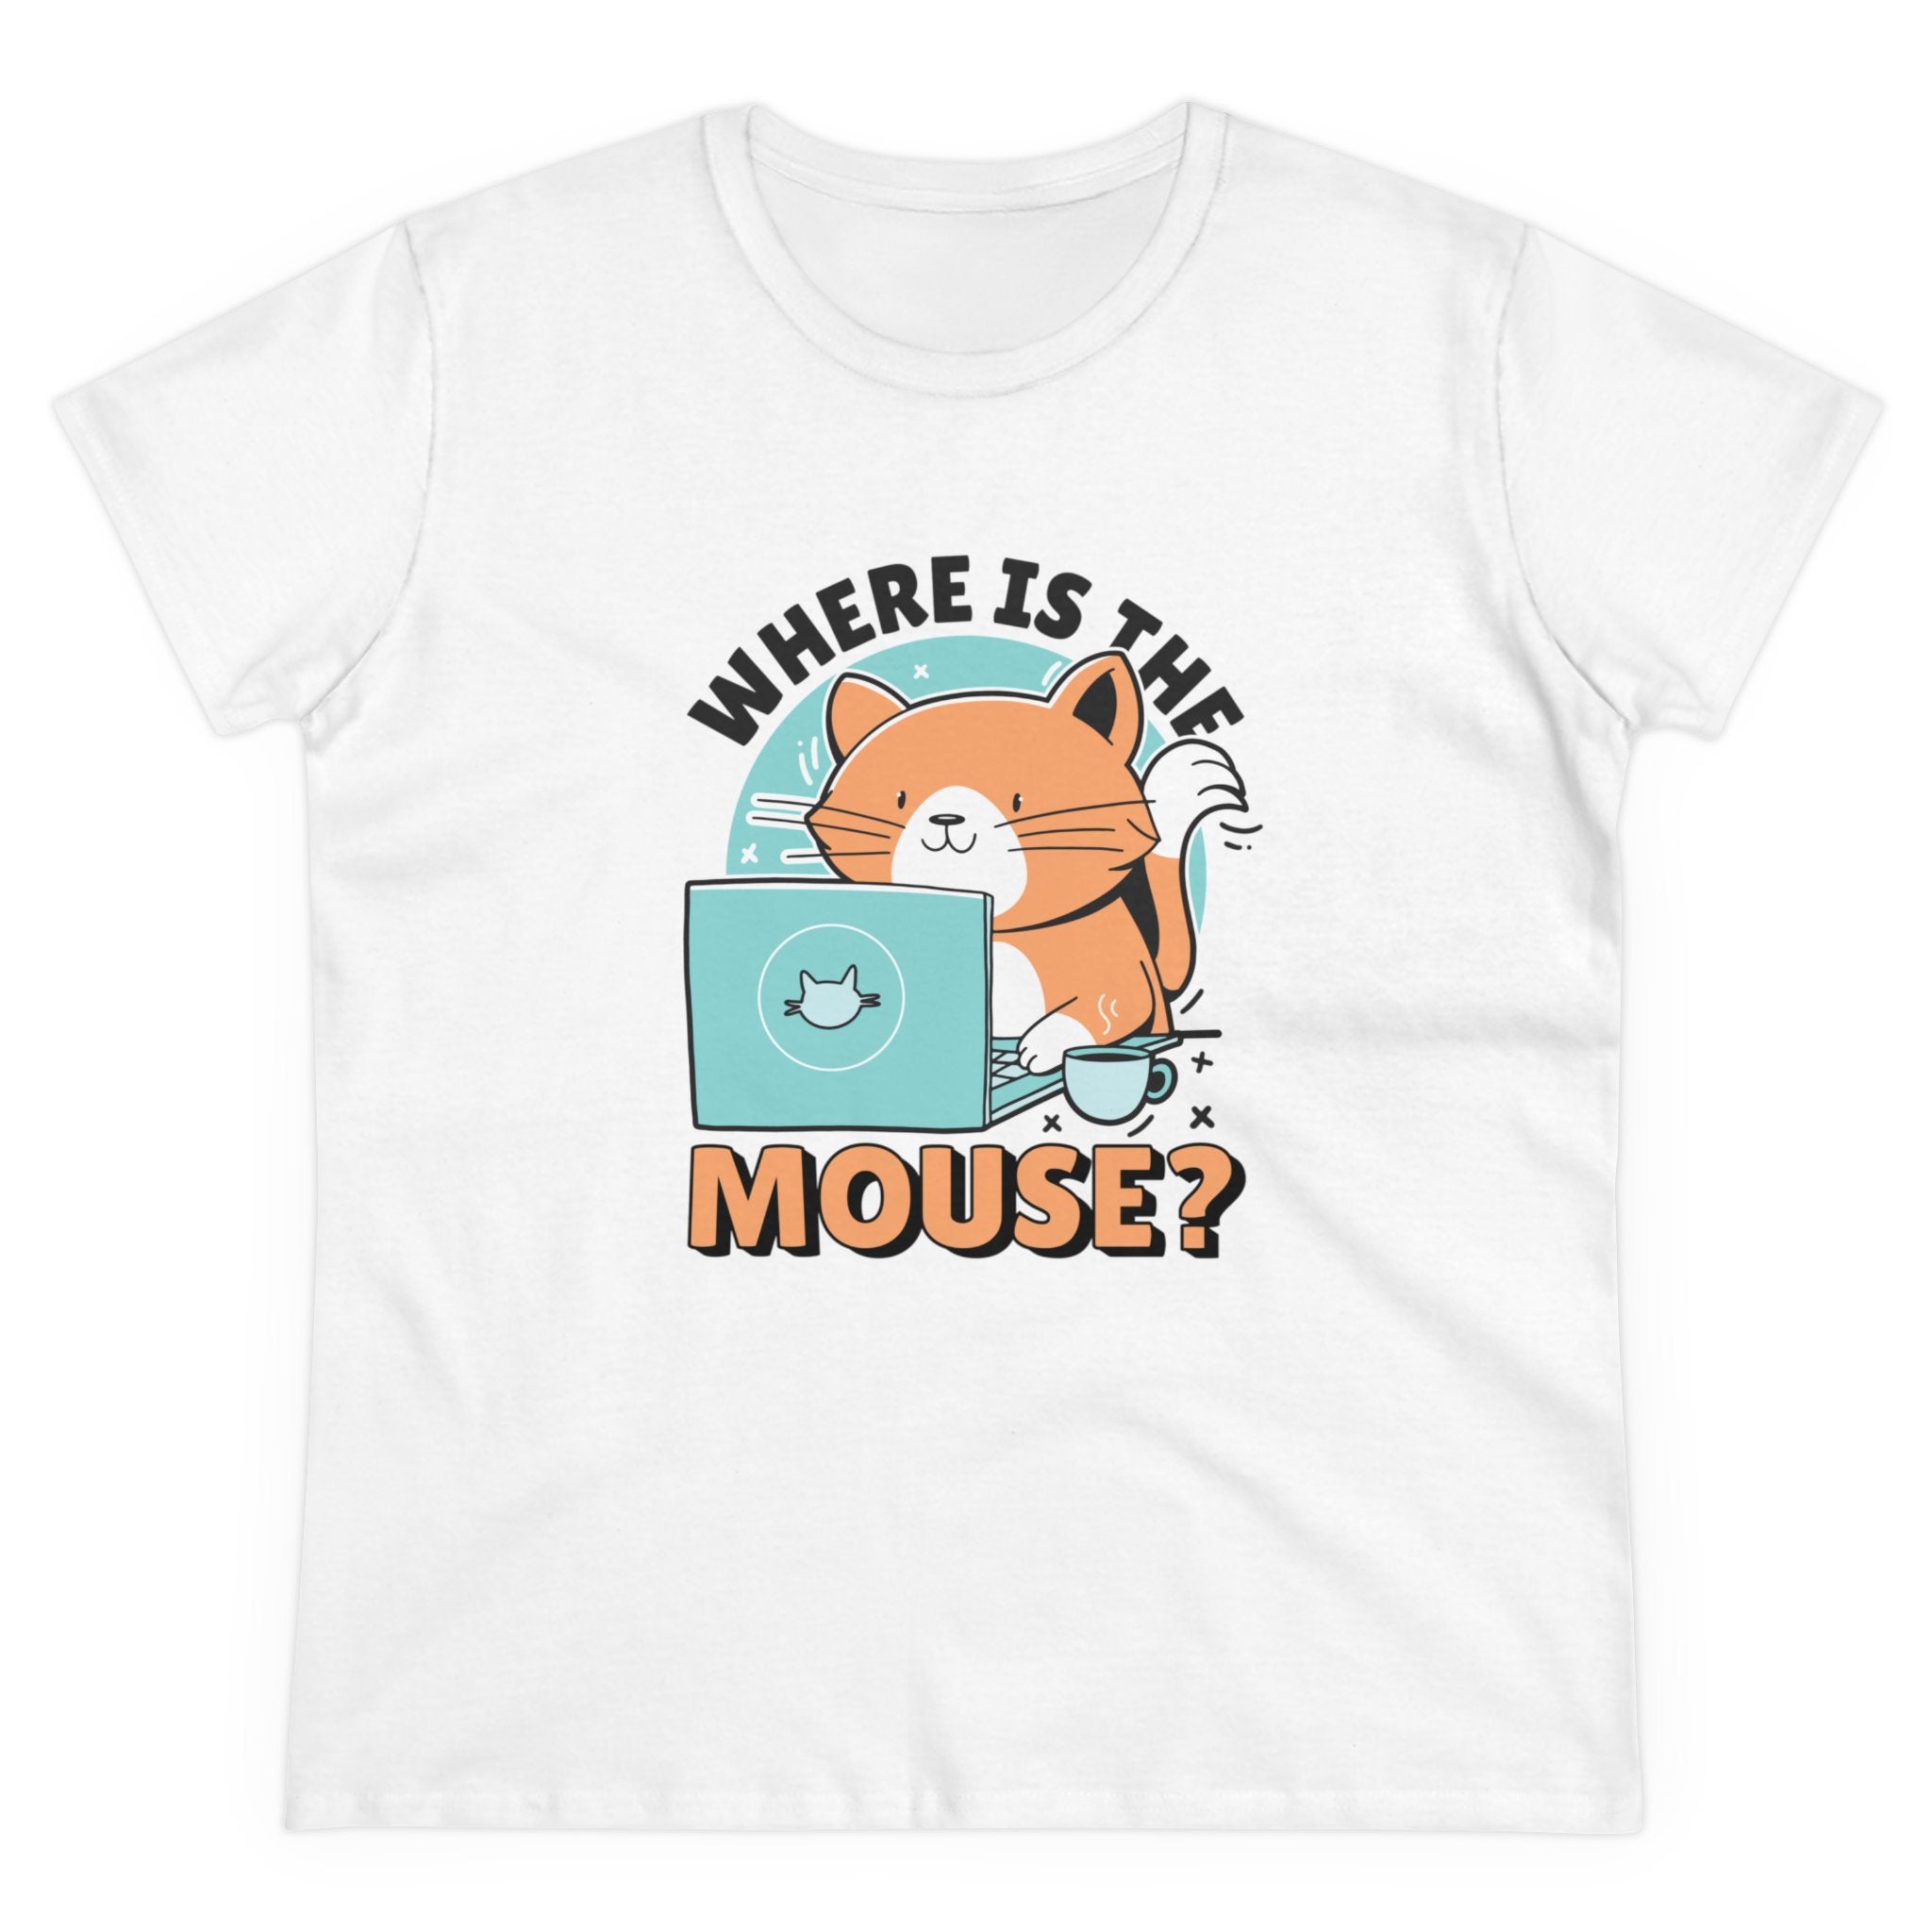 Mouse Cat - Women's Tee in pre-shrunk cotton featuring a playful Mouse Cat design: an orange cat searching around a laptop with the text "WHERE IS THE MOUSE?".